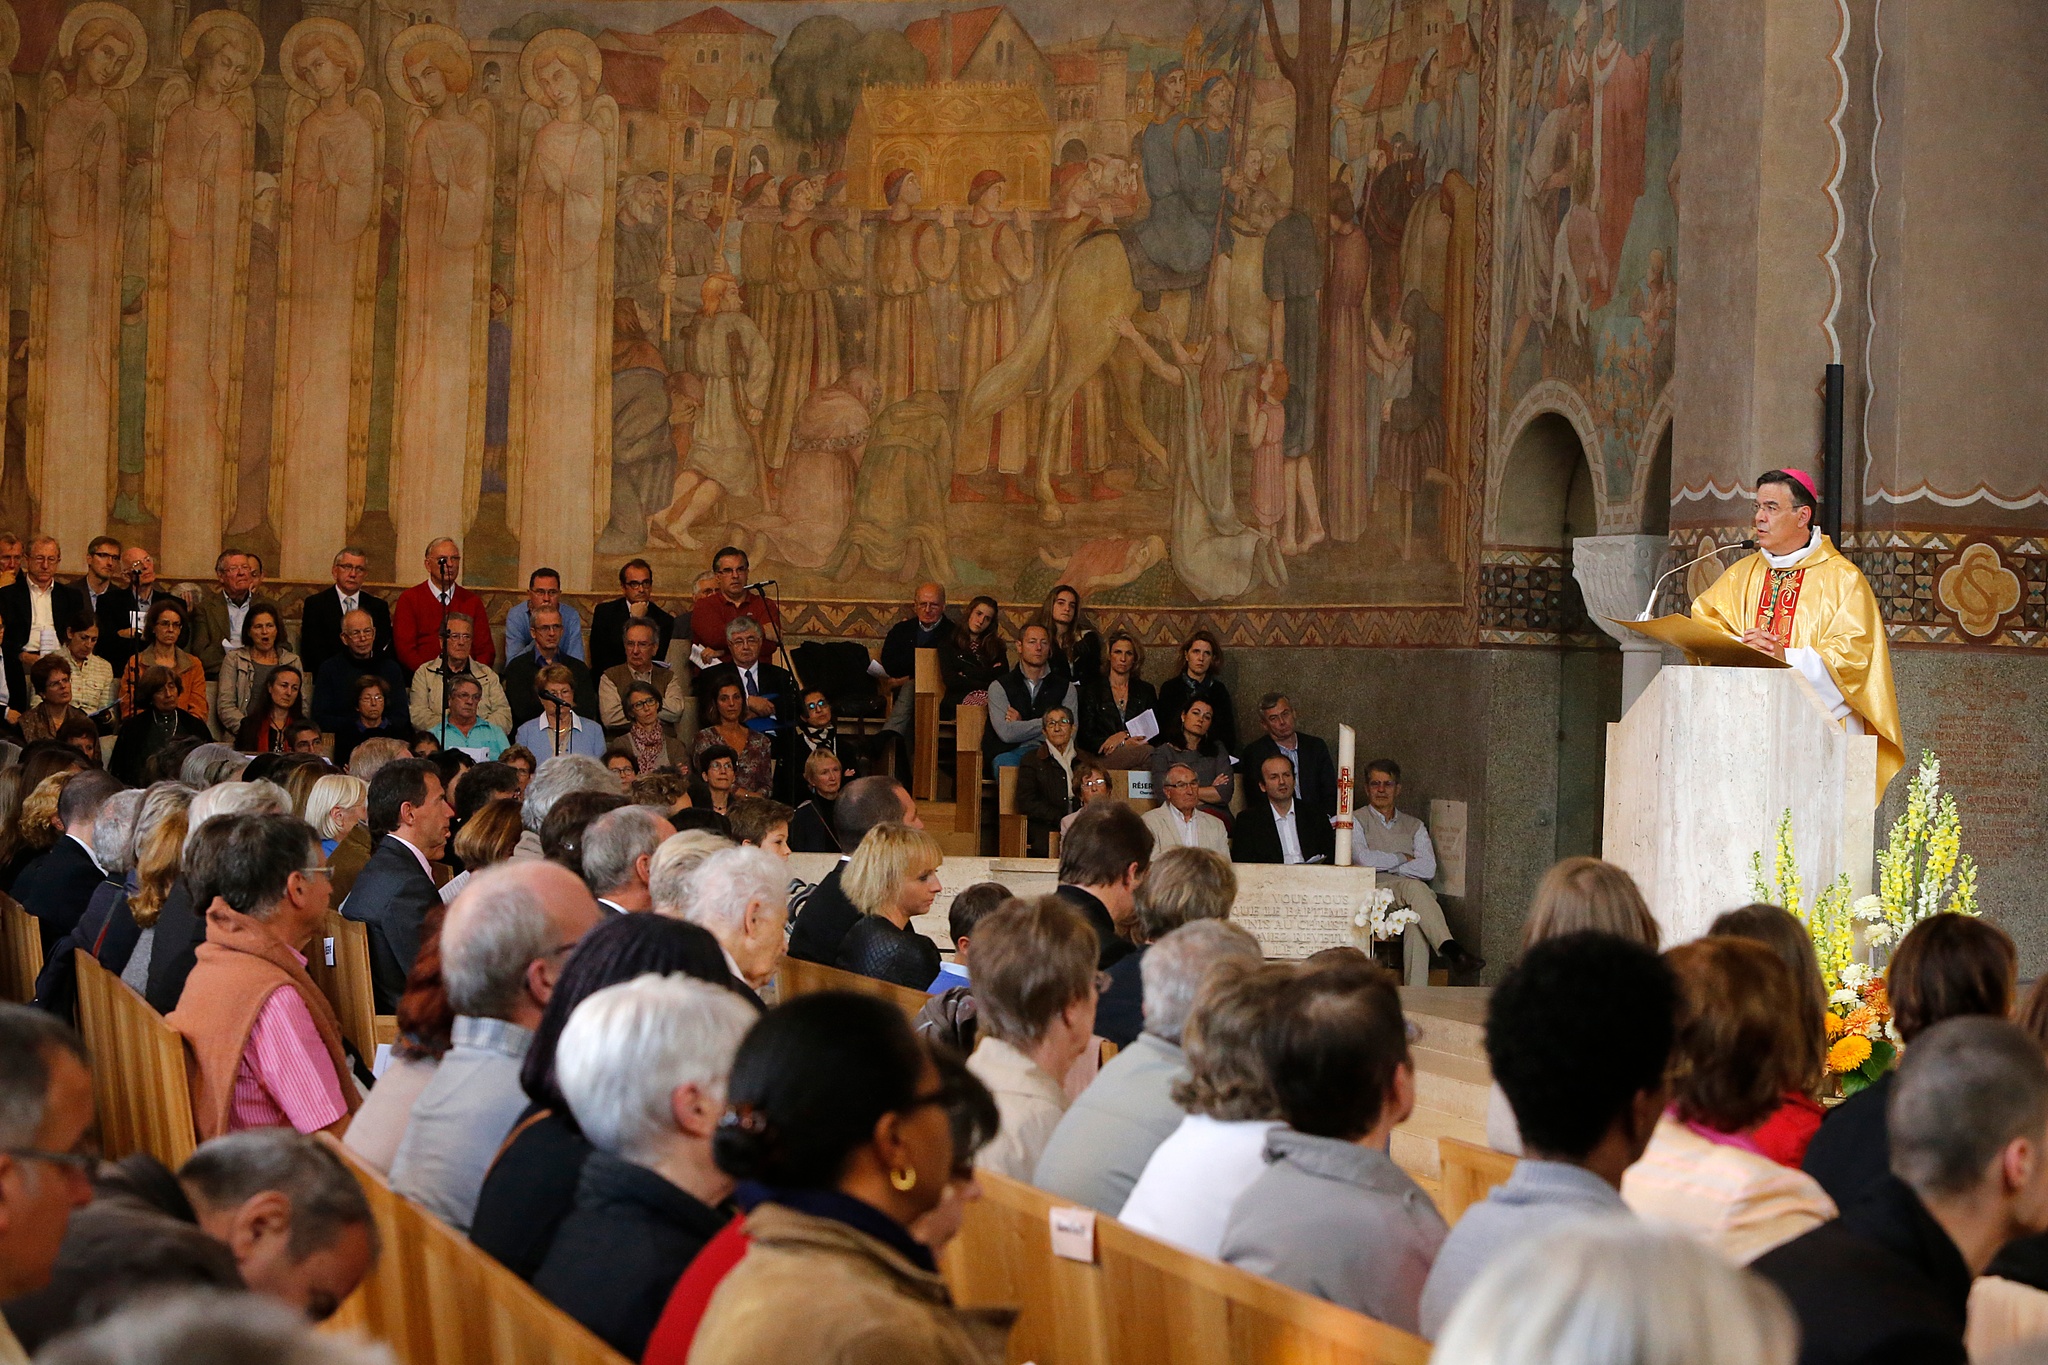 A priest at a lectern in a church in front of a seated congregation